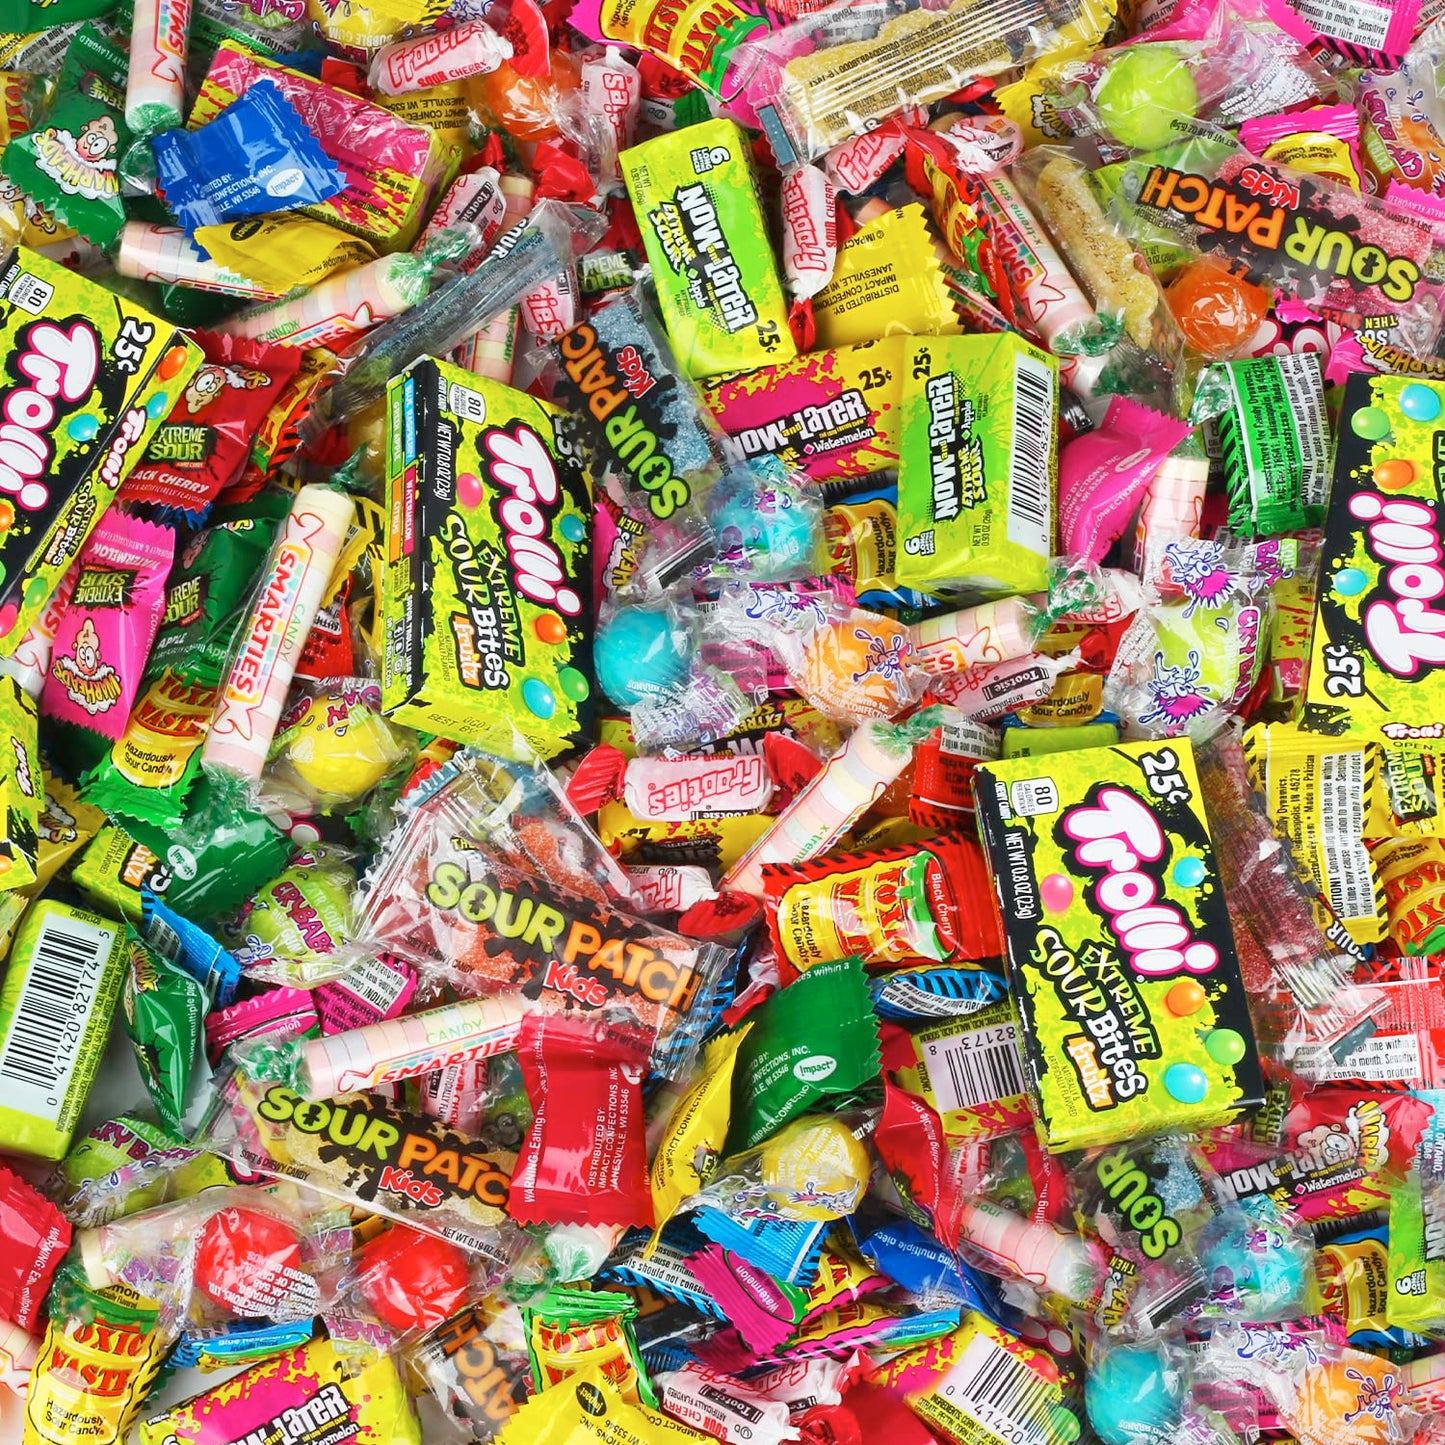 Sour Candy Variety Pack - Bulk Candy - Individually Wrapped Candy - Assorted Candy - Candy For Party Favors For Kids (4 Pounds)